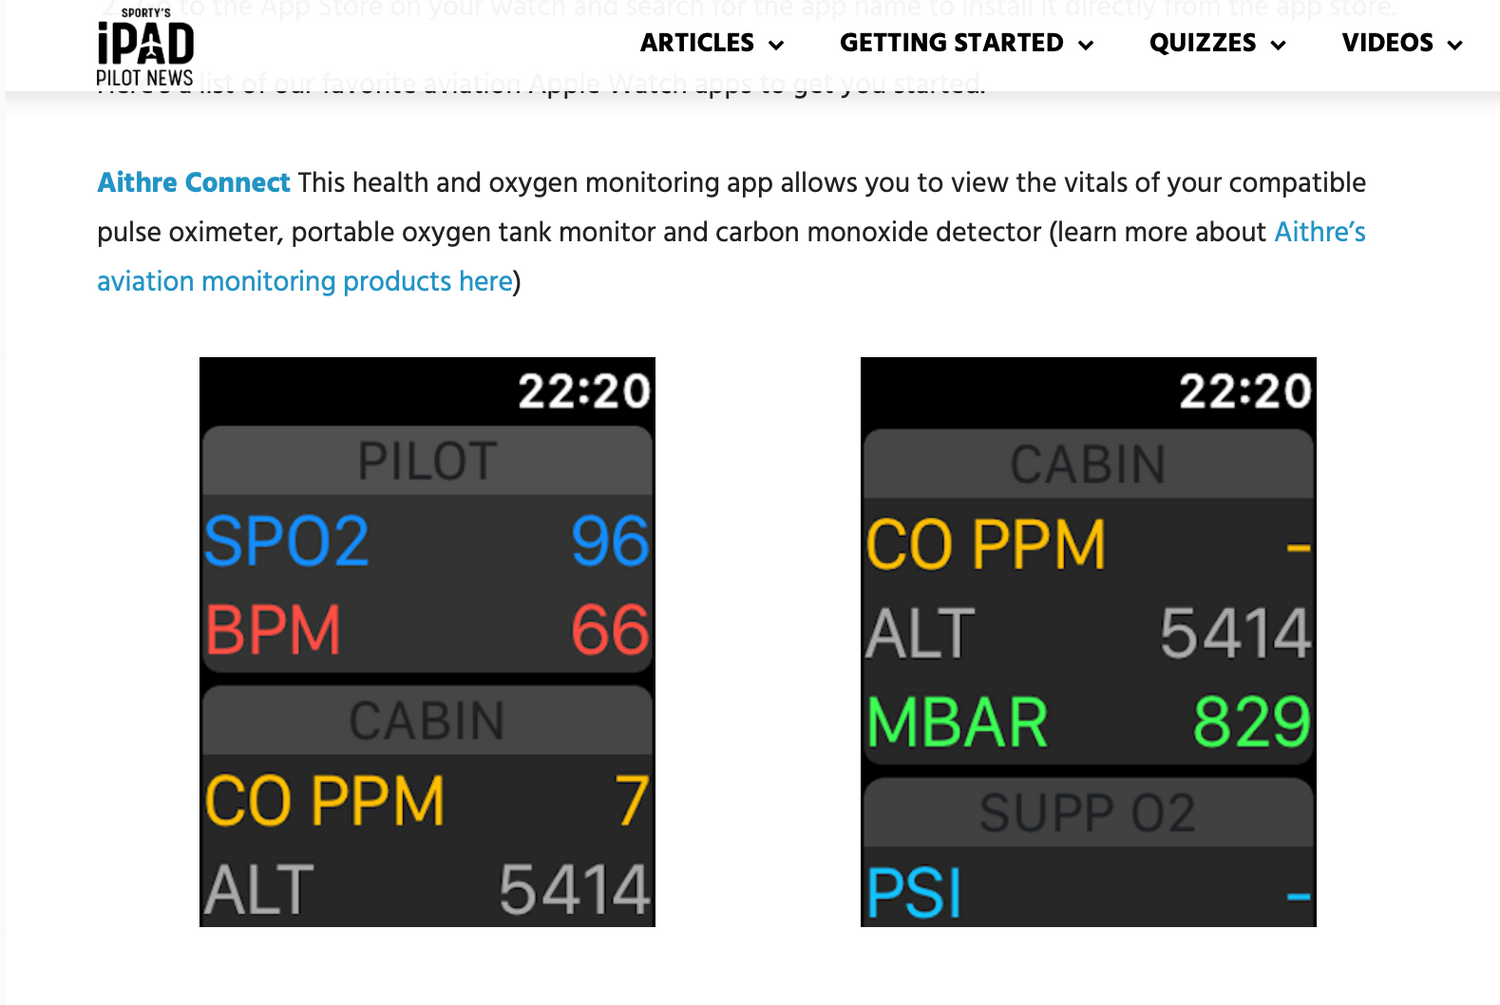 Sporty's iPad Pilot News - Top Aviation Apps for Apple Watch- Featuring Aithre Connect!